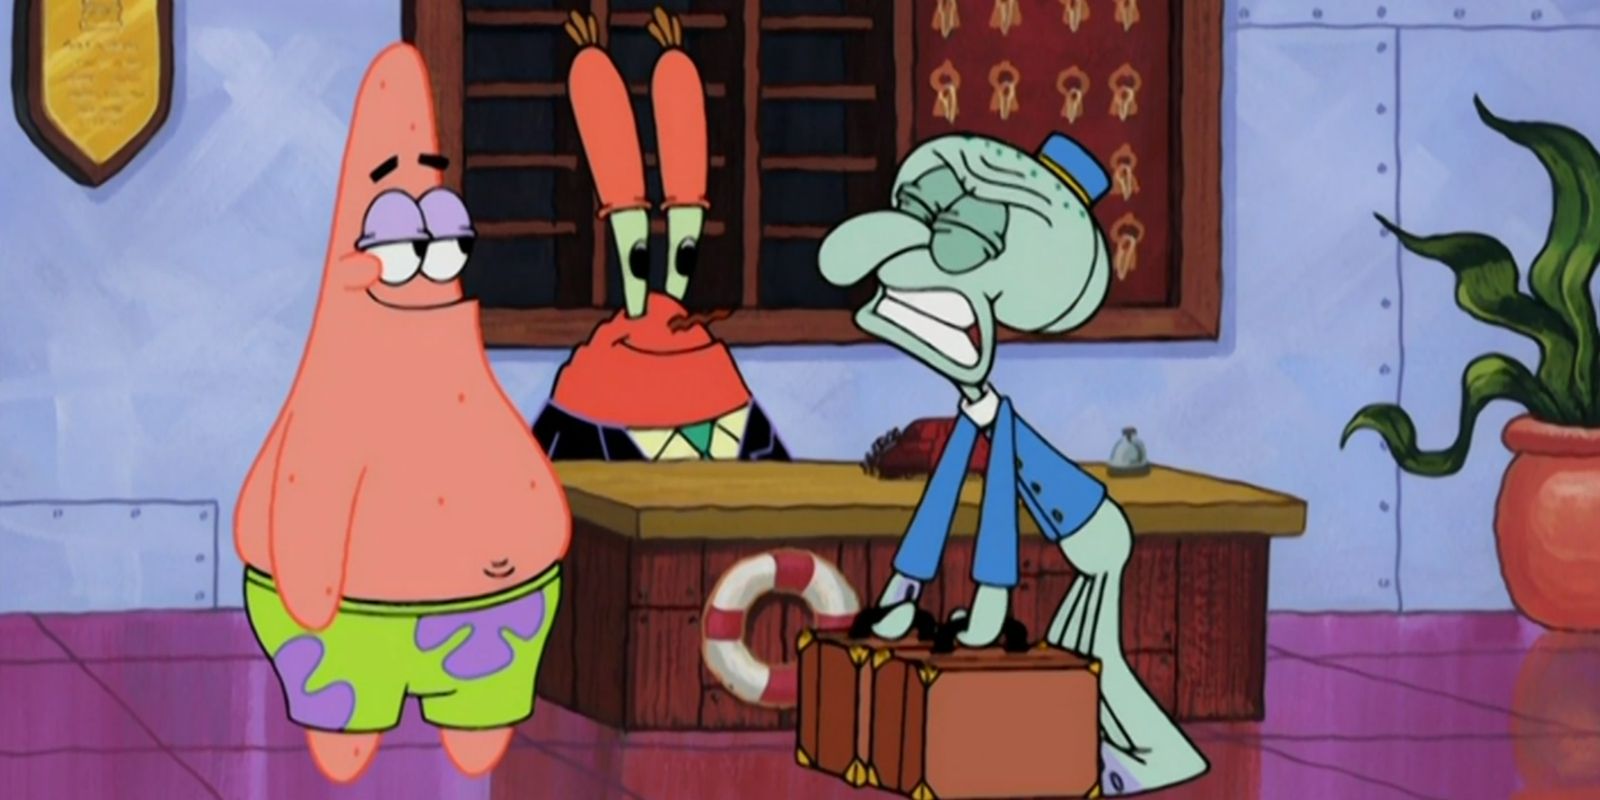 Patrick and Mr. Krabs smile watching Squidward struggle to lift luggage in Krusty Towers of SpongeBob SquarePants